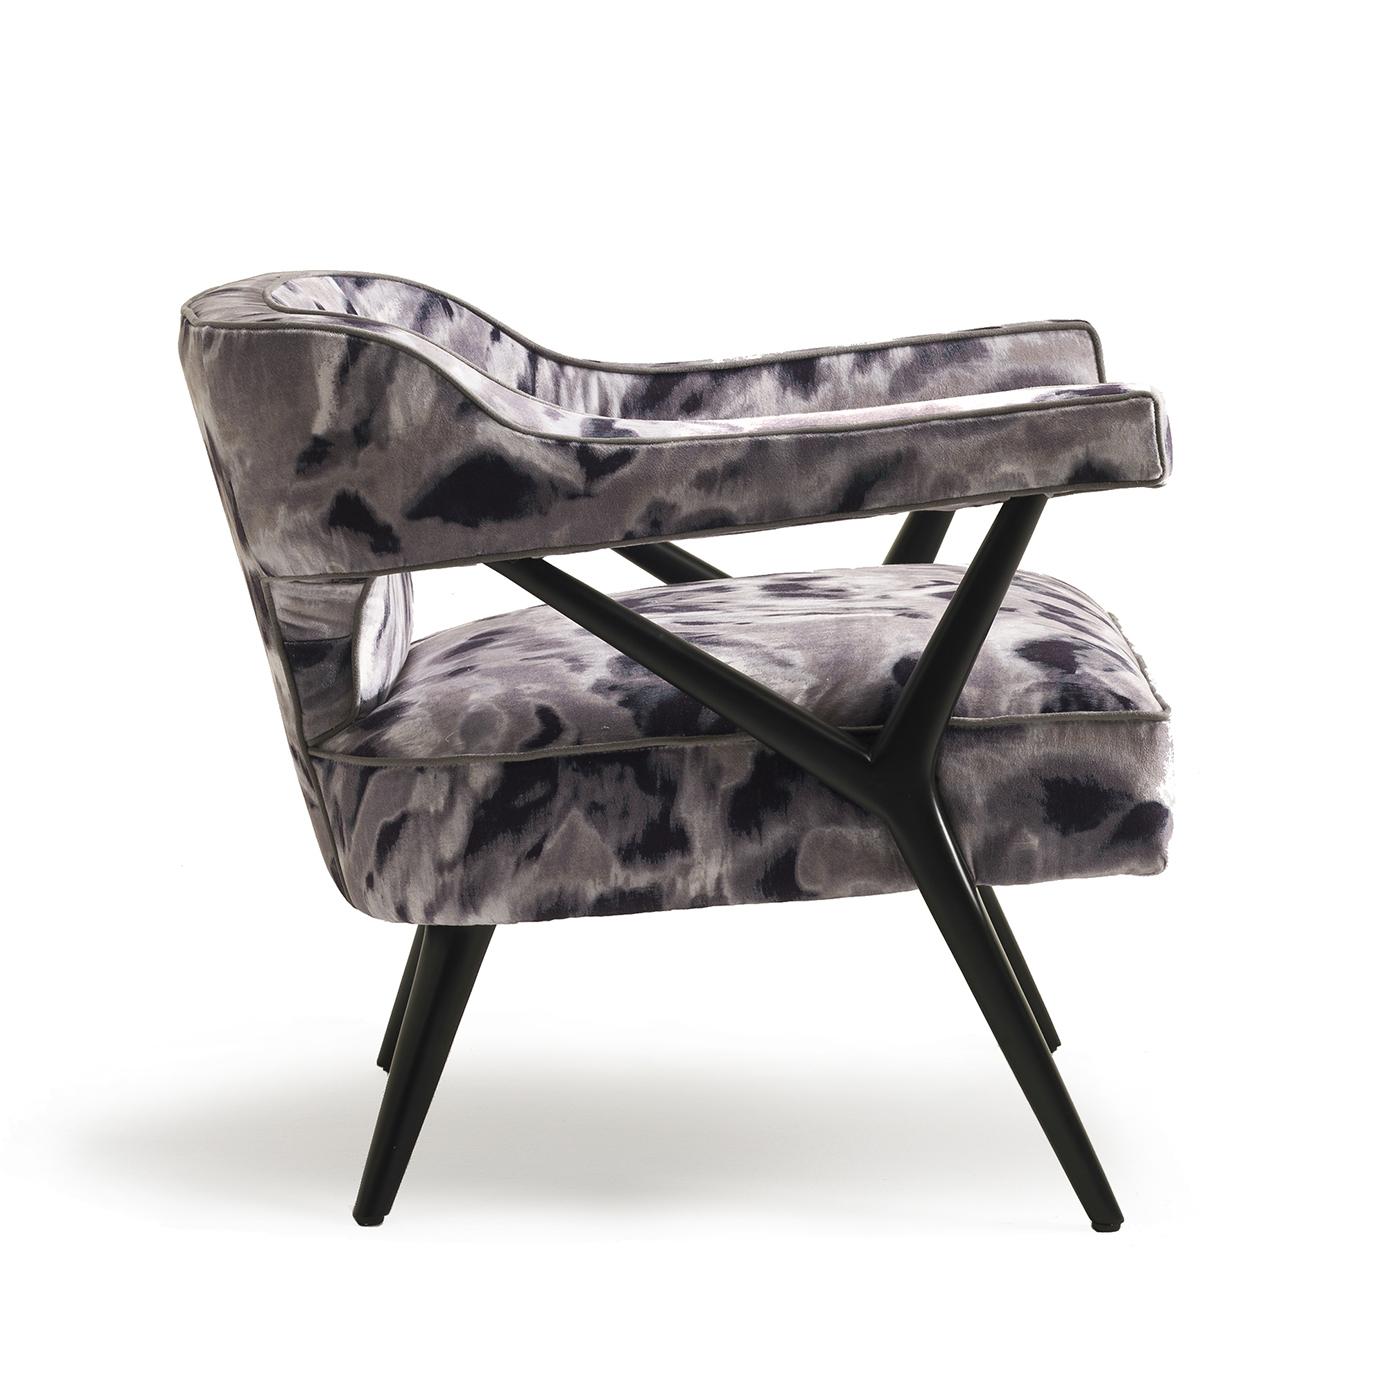 This lounge chair exudes elegant charm and timeless sophistication, thanks to the combination of a geometric structure in wood with a matte black finish supporting cut-out cushions upholstered in a stunning printed fabric in black, white, and grey.